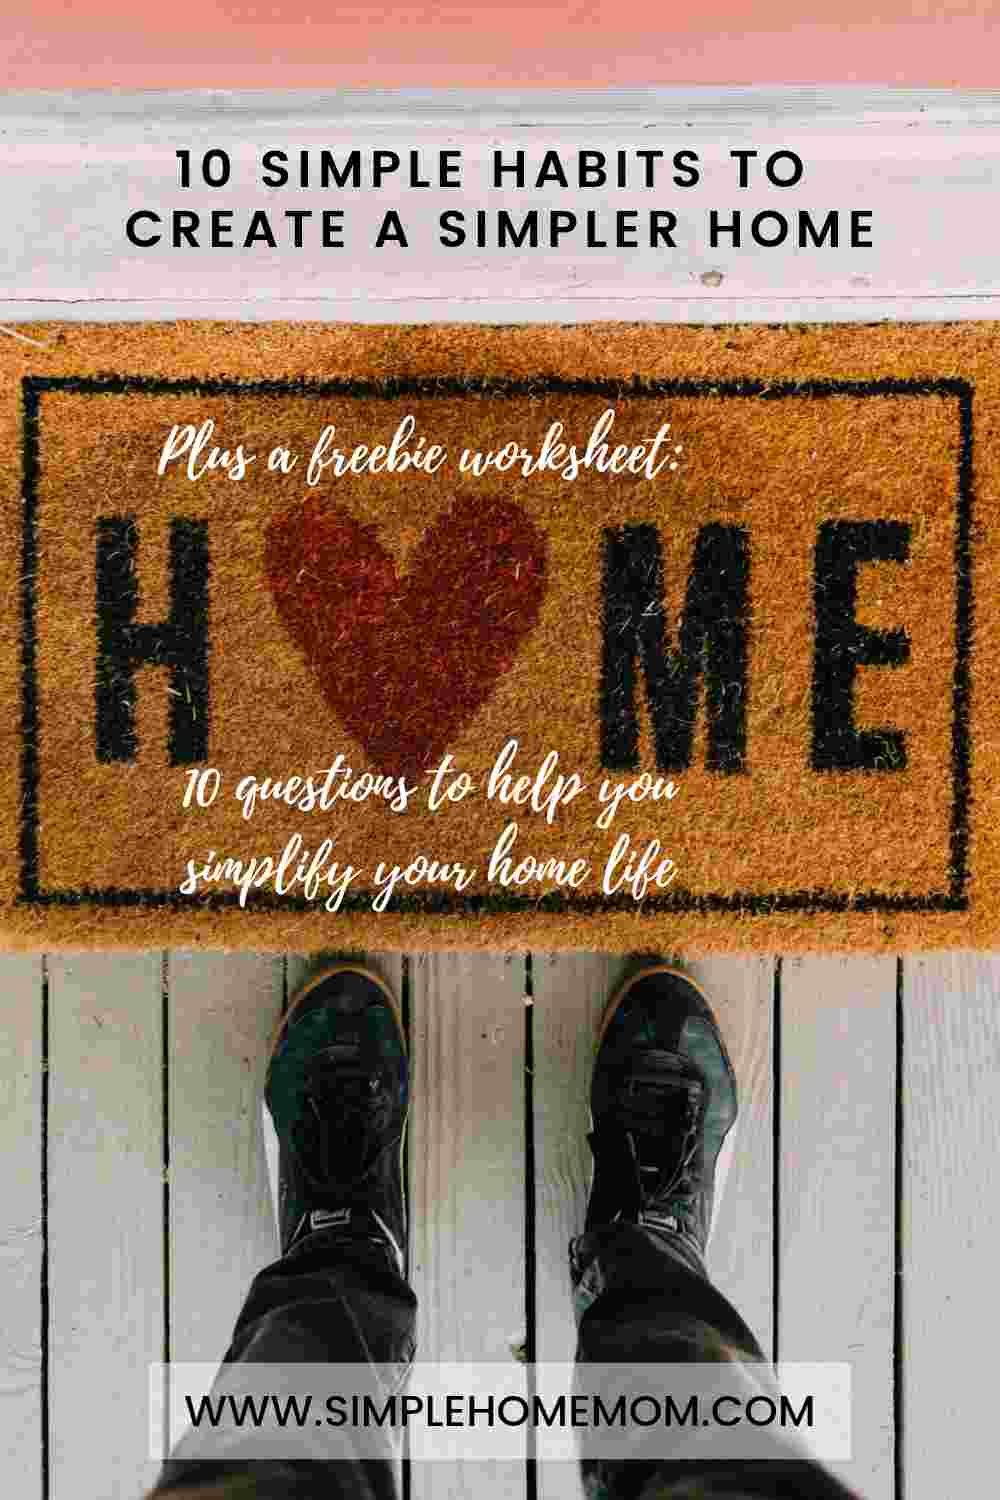 Someone standing next to a doormat that says "home."